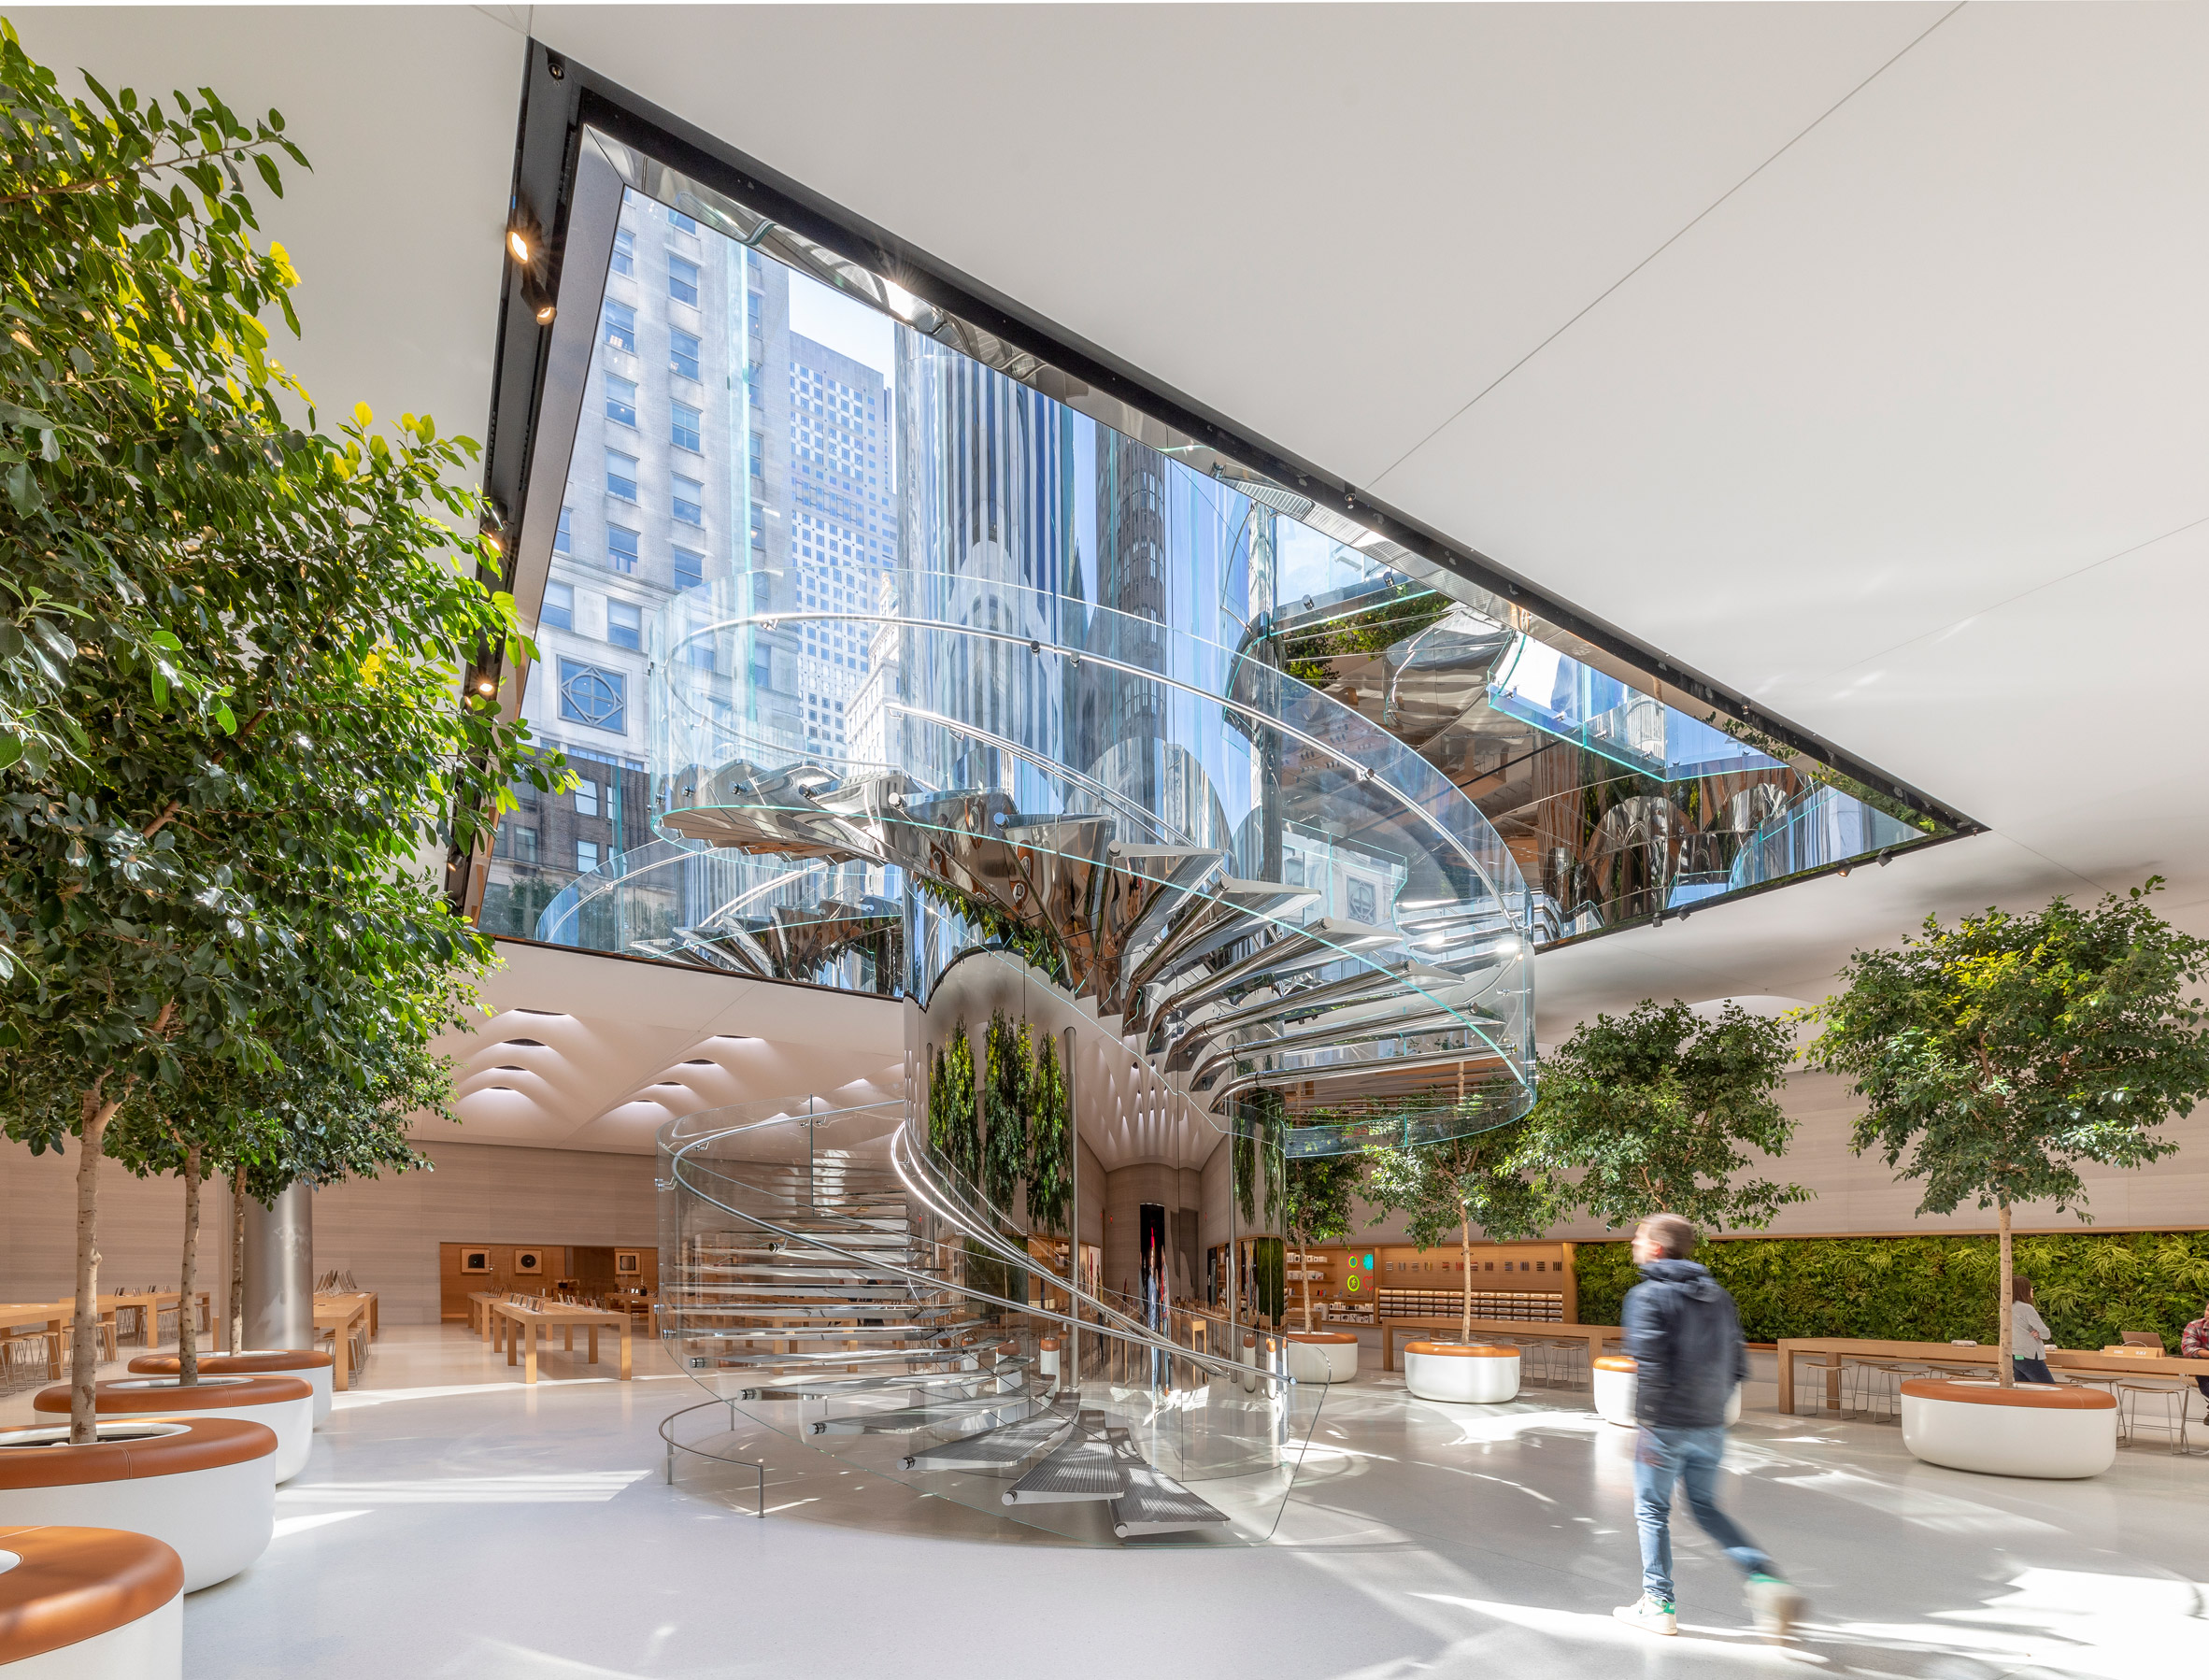 Foster + Partners unveils first flagship Apple Store in India